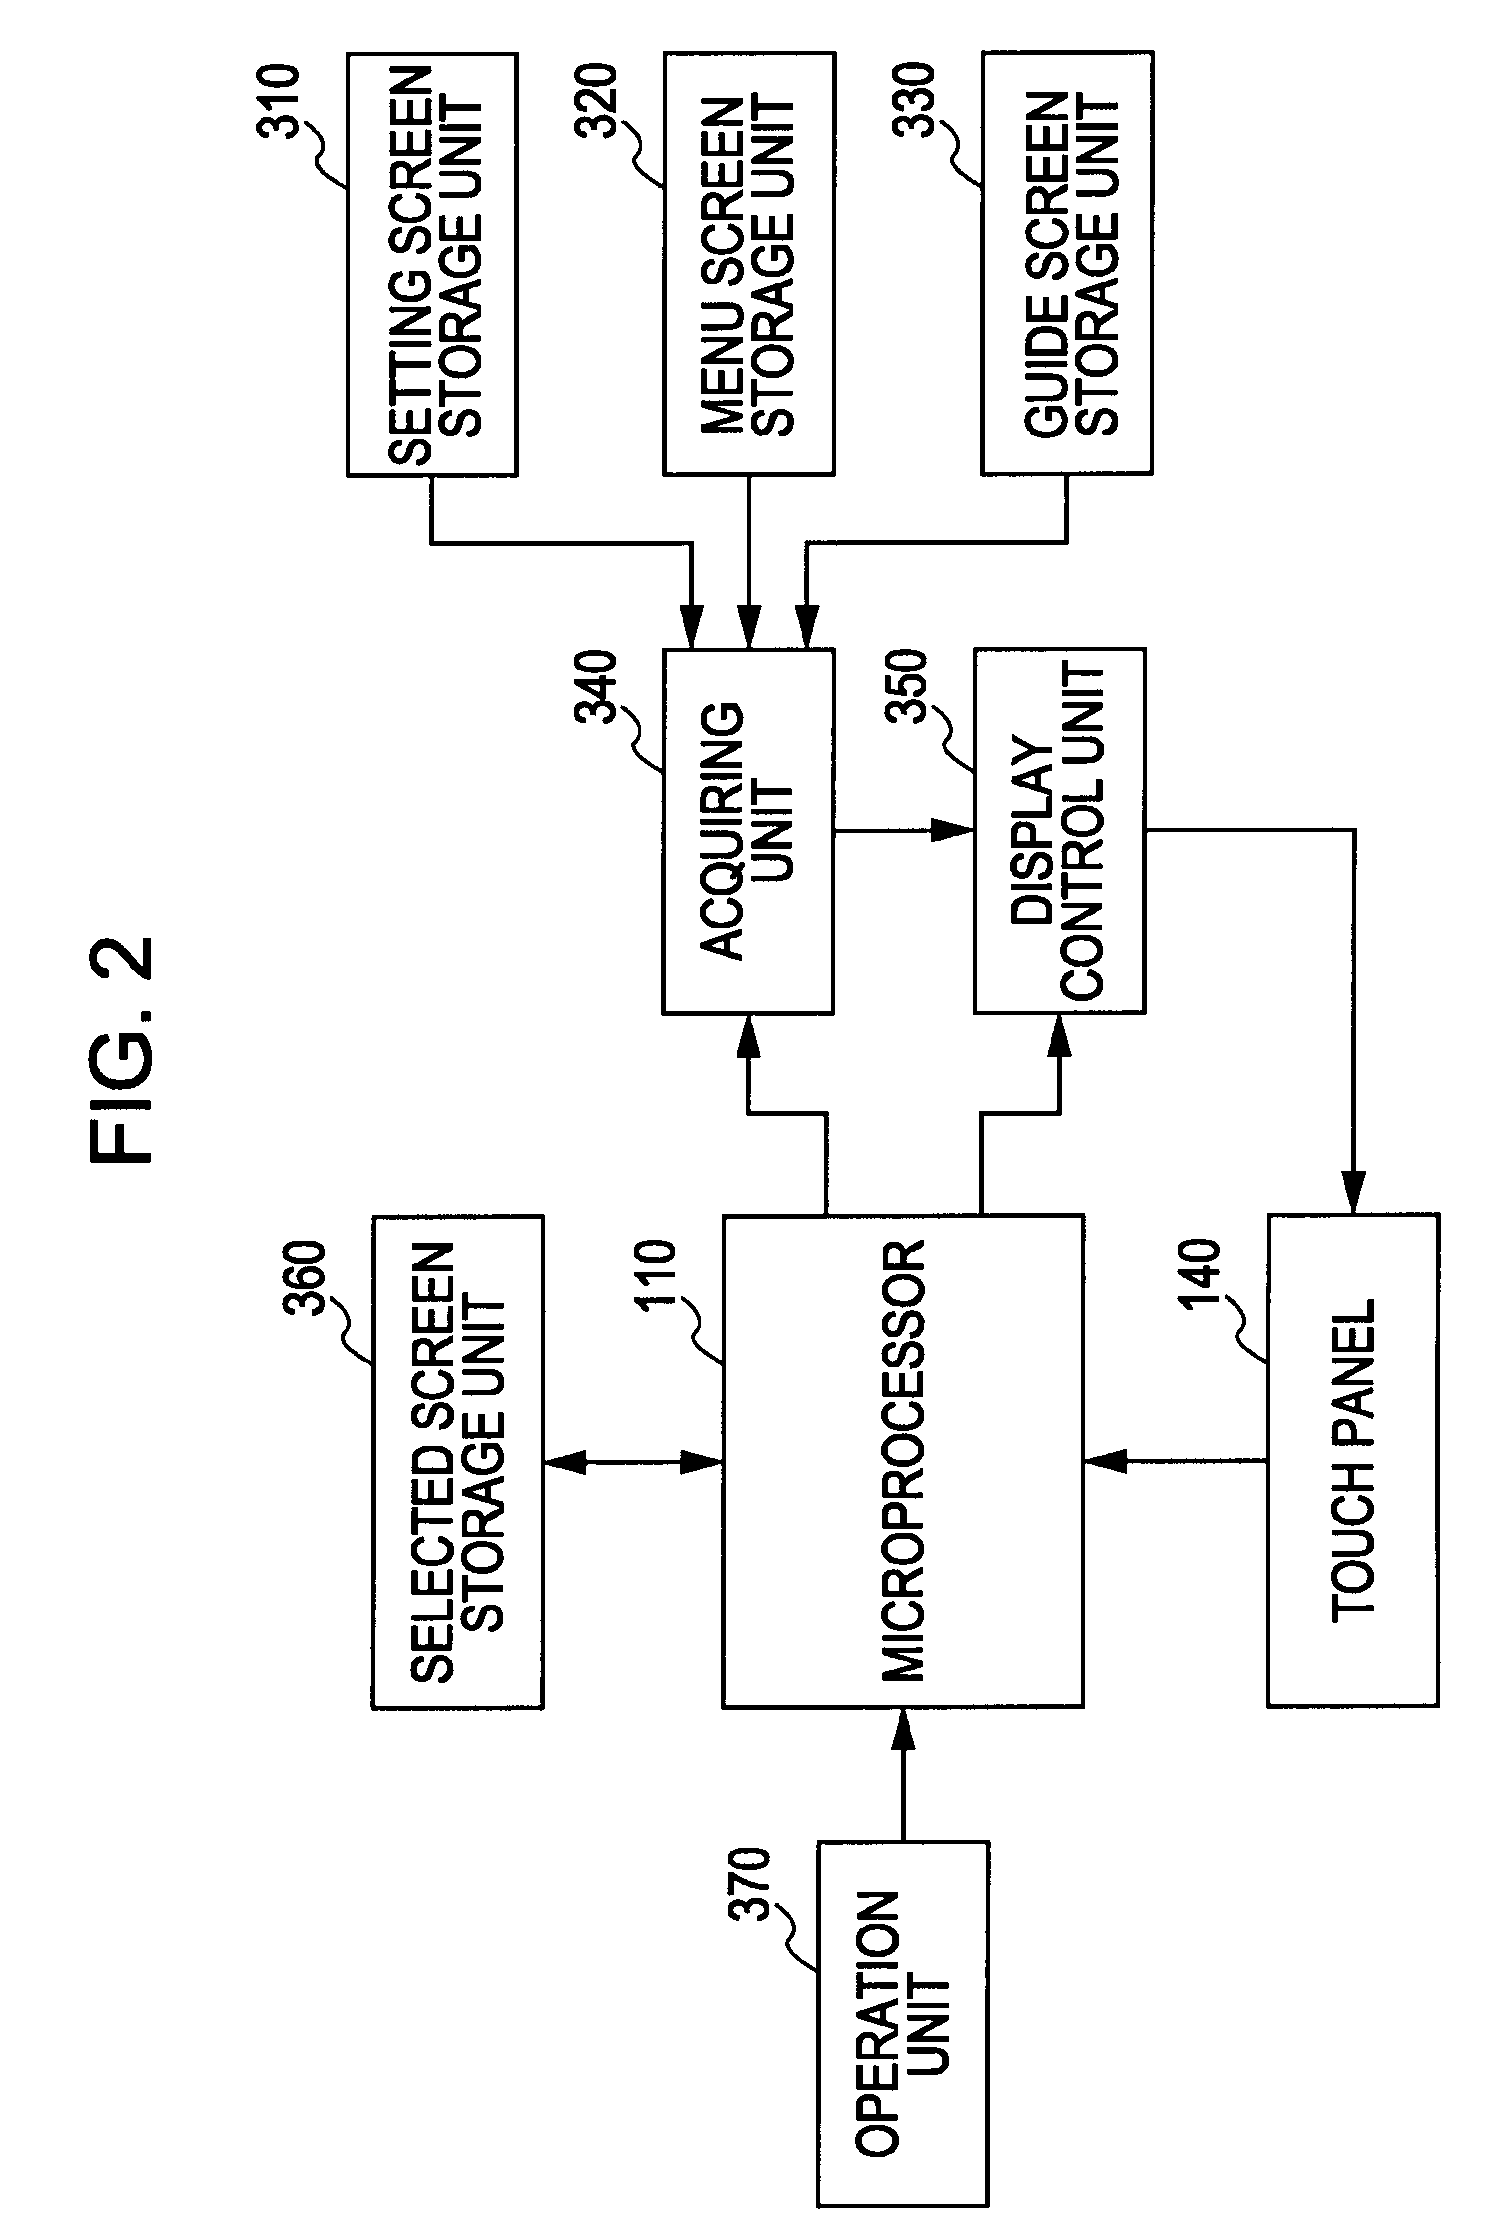 Image pickup apparatus, method for controlling display of image pickup apparatus, and computer program for executing method for controlling display of image pickup apparatus